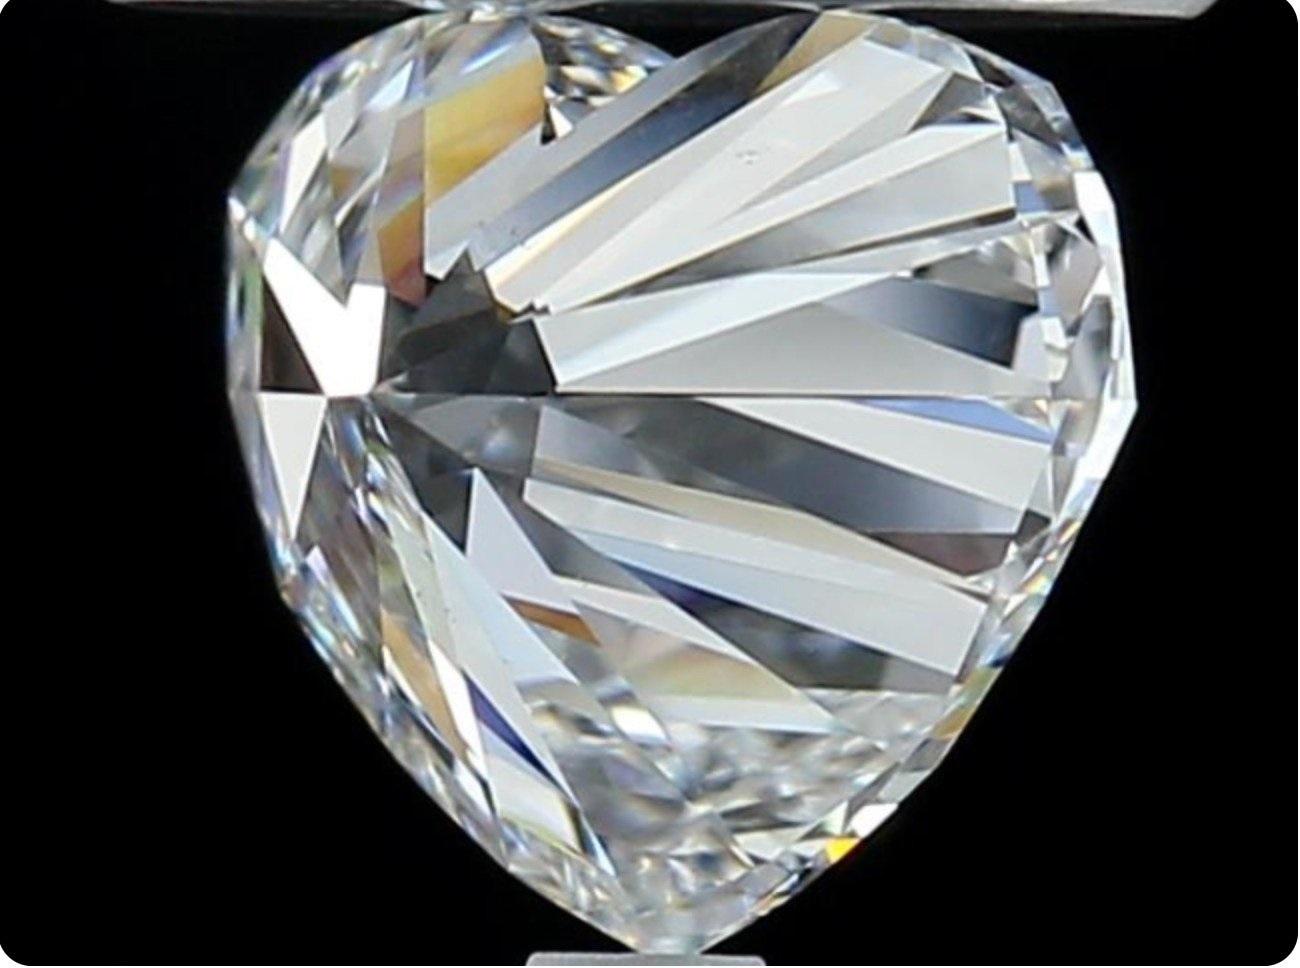 Pair of natural and ideal Heart shape diamonds diamonds in a 0.60 total carat weight DE SI1 Ideal cut Heart with GIA Certificate and laser inscription number.

GIA 2416279309 & 2418278658

Sku: 591 & 599
